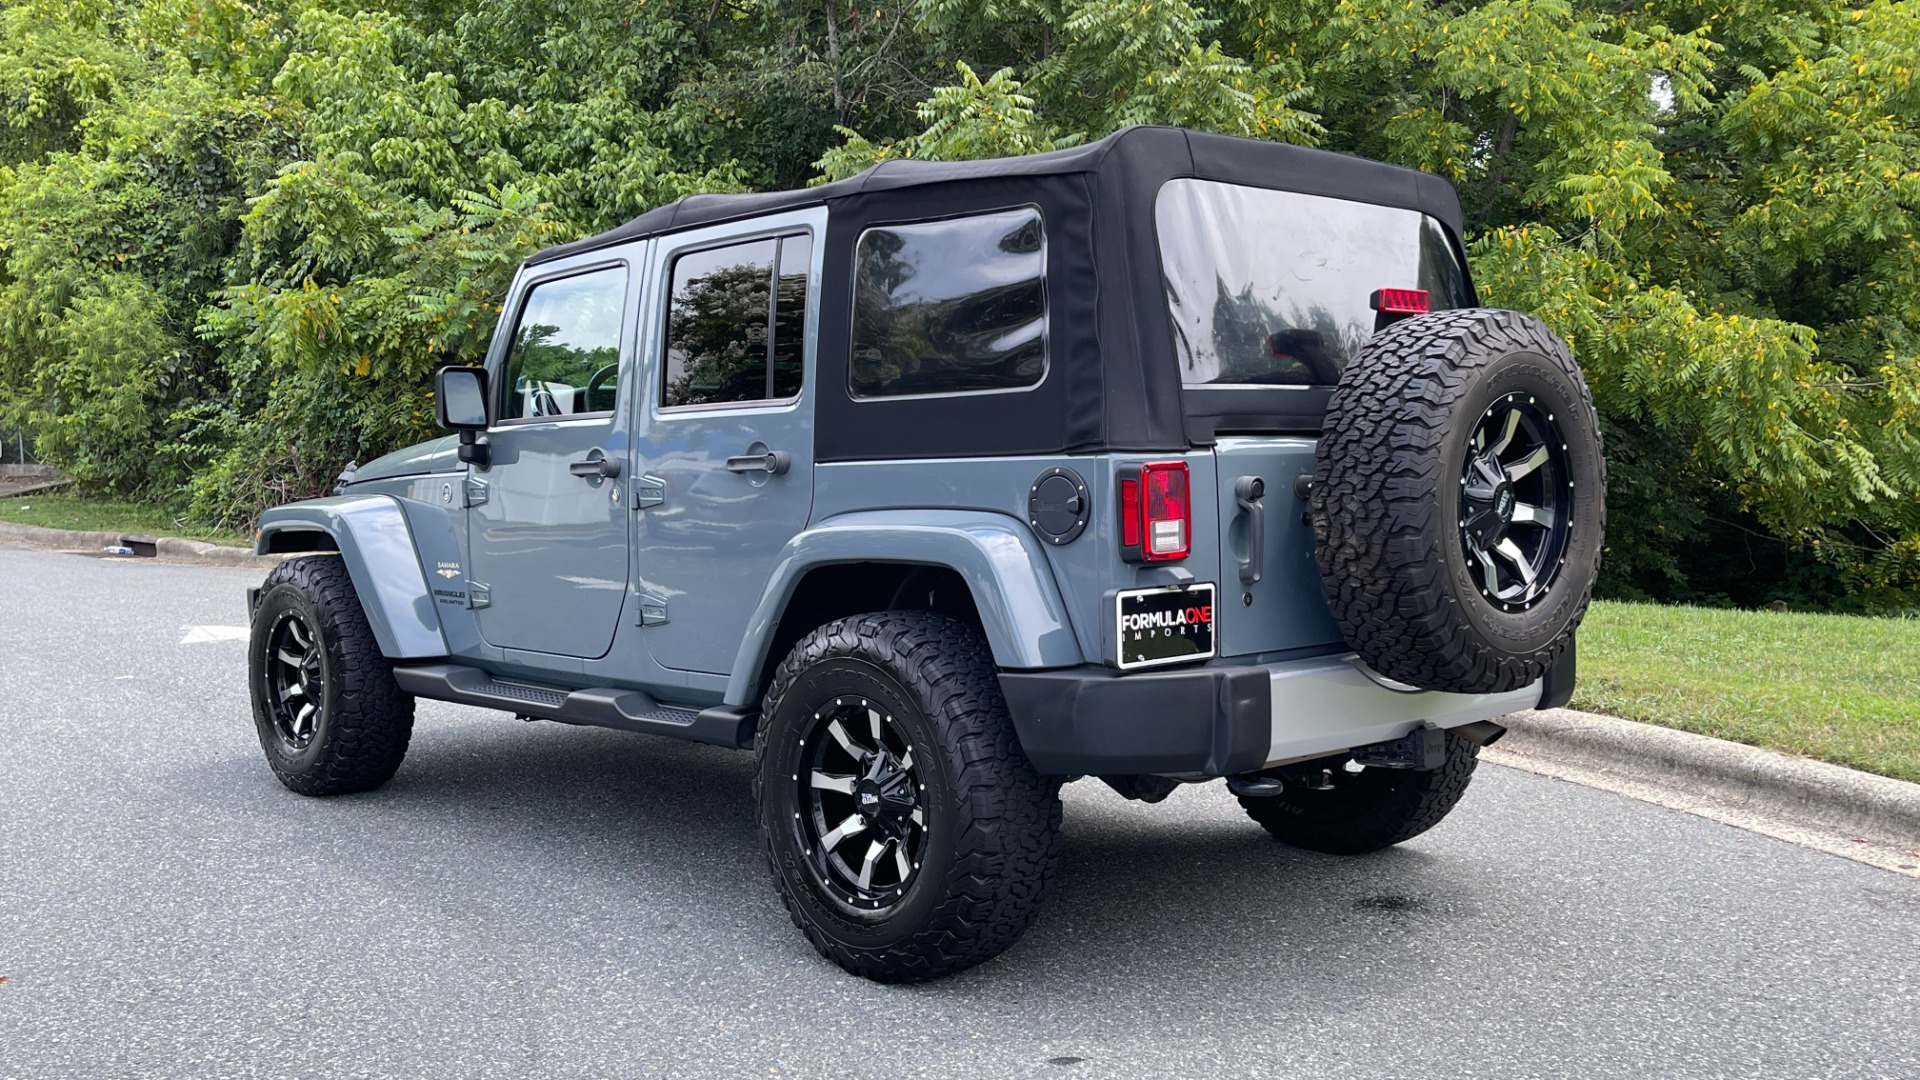 Used 2015 Jeep Wrangler Unlimited SAHARA / UPGRADED WHEELS / SOFT TOP / LED HEADLIGHTS / MAX TOW PACKAGE for sale Sold at Formula Imports in Charlotte NC 28227 7